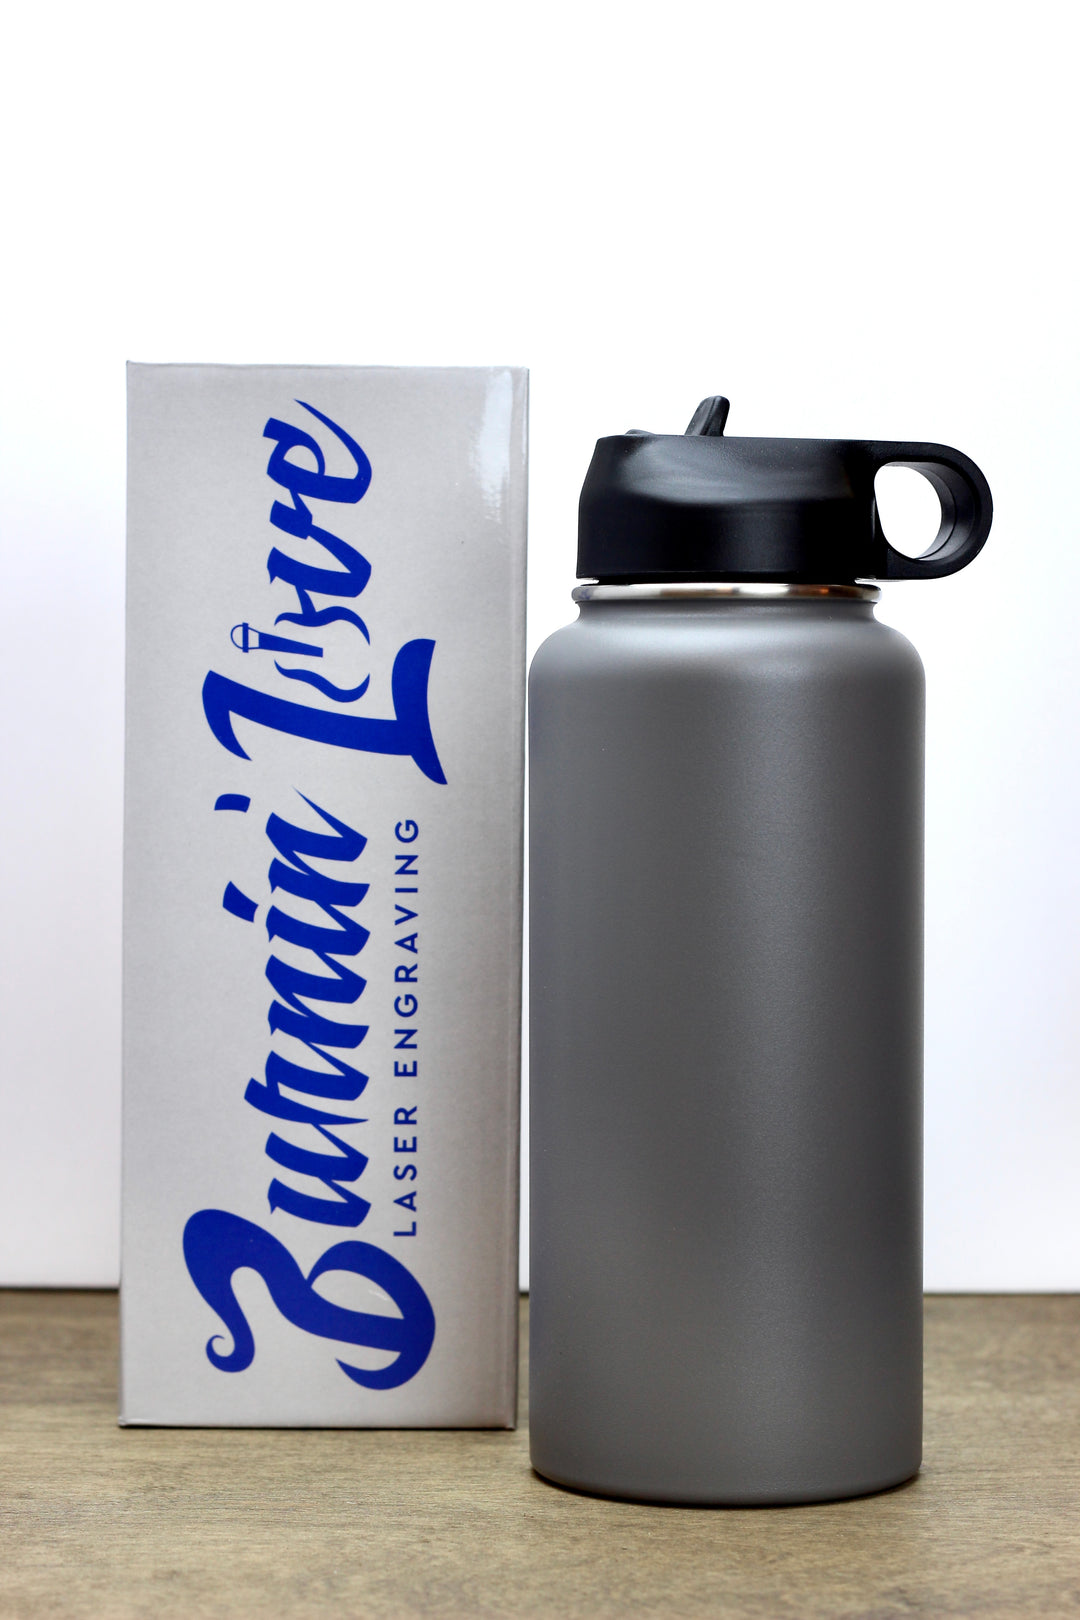 Customized Black Smart Temperature Water Bottle - love craft gift